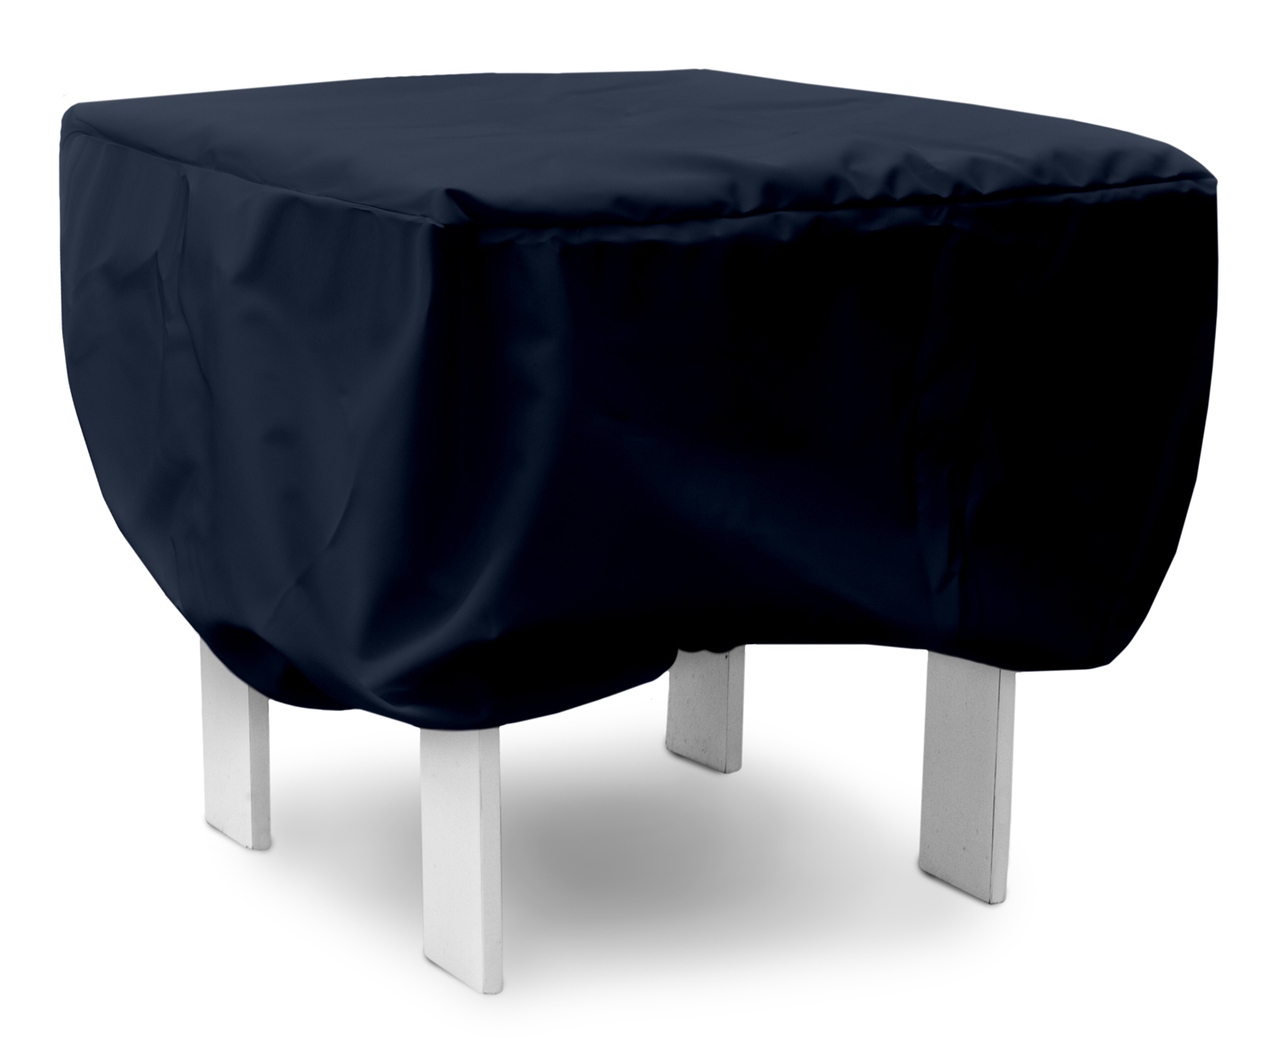 Small Square Table Cover - 20L x 20W x 15H in.